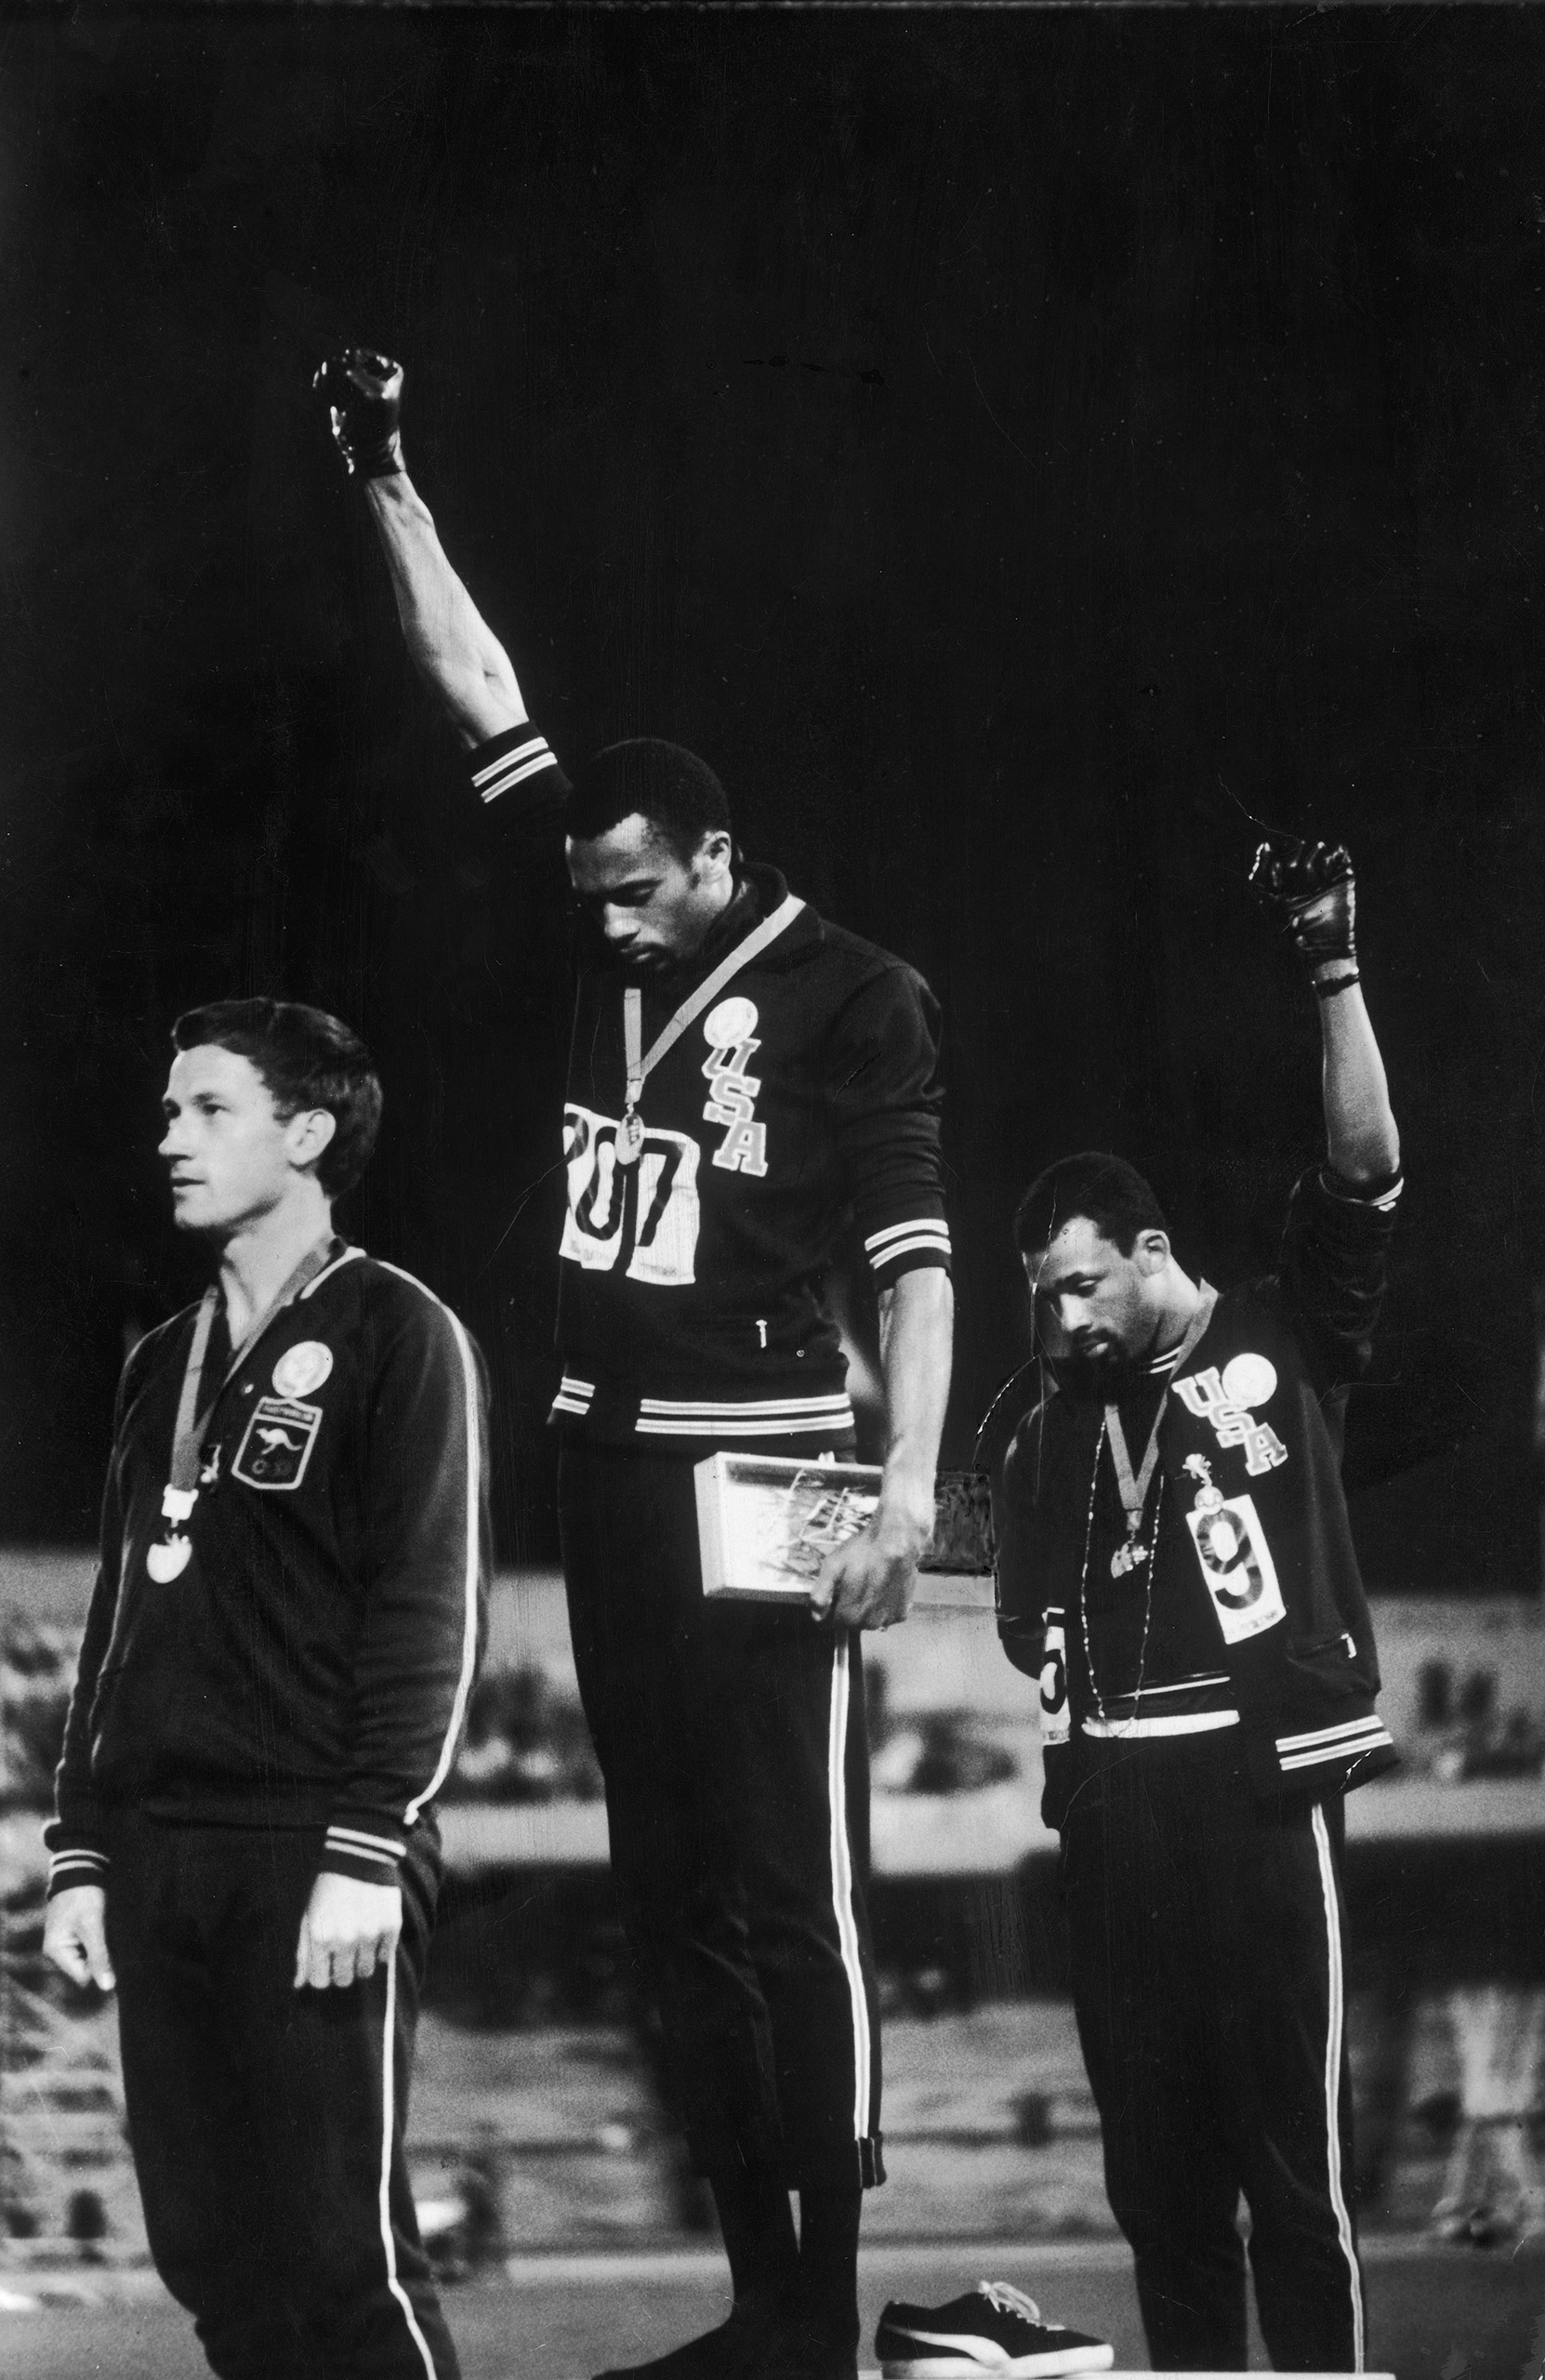 American track stars Tommie Smith (C) and John Carlos (R) standing on podium after winning gold and bronze Olympic medals, respectively, raising black-gloved fists, in support of civil rights/black power, while Australian silver medalist Peter Norman stands by at the 1968 summer Olympics in Mexico City, Mexico.